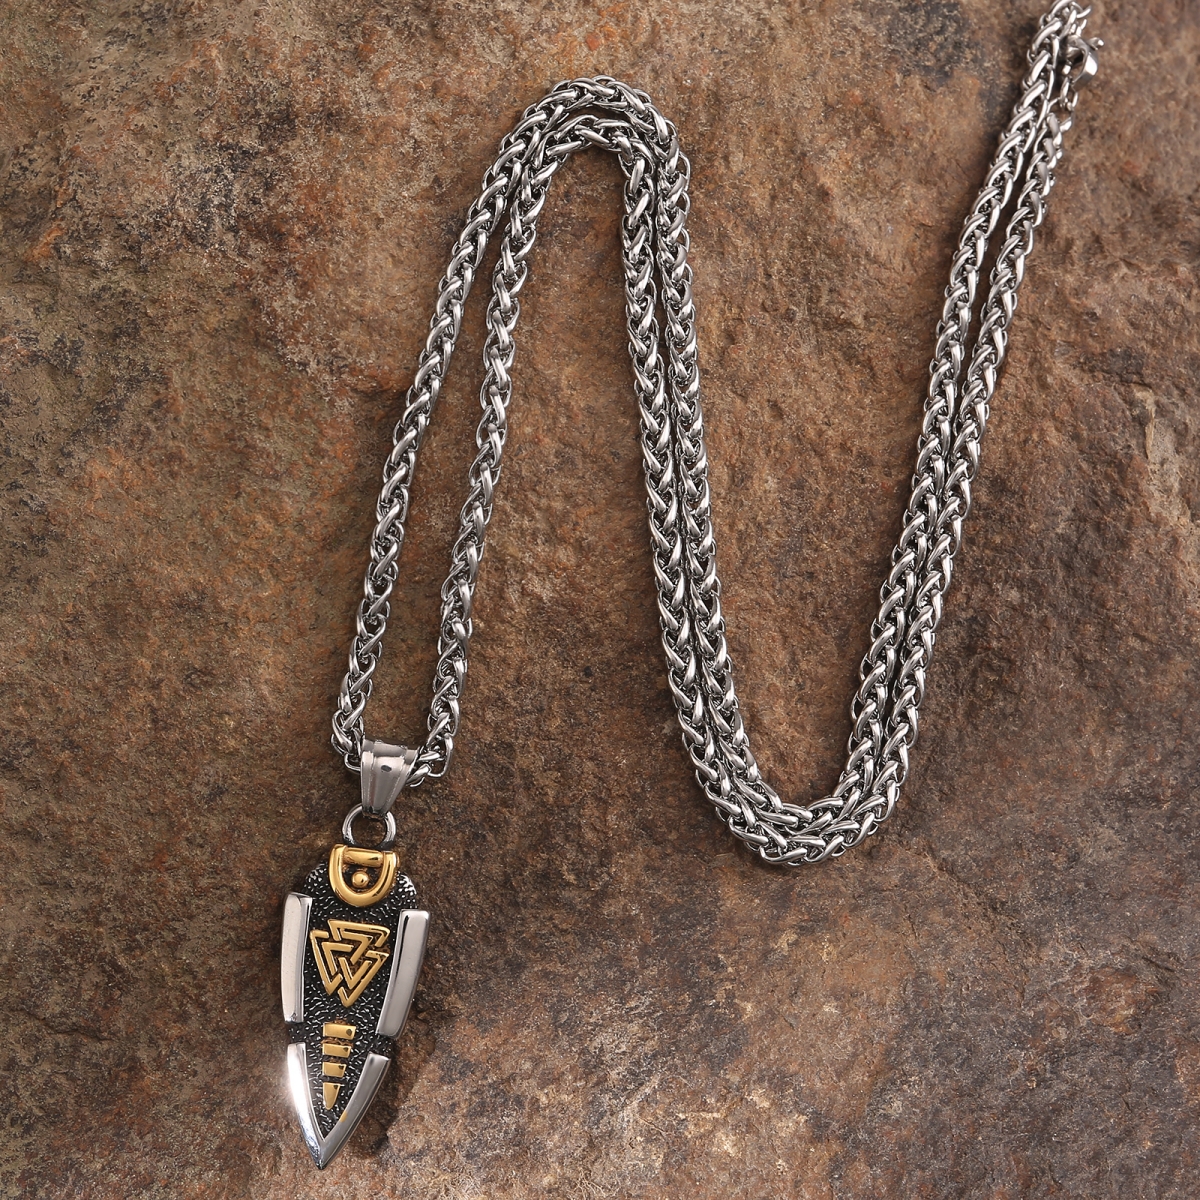 Arrowhead Necklace US$3.5/PC-NORSECOLLECTION- Viking Jewelry,Viking Necklace,Viking Bracelet,Viking Rings,Viking Mugs,Viking Accessories,Viking Crafts